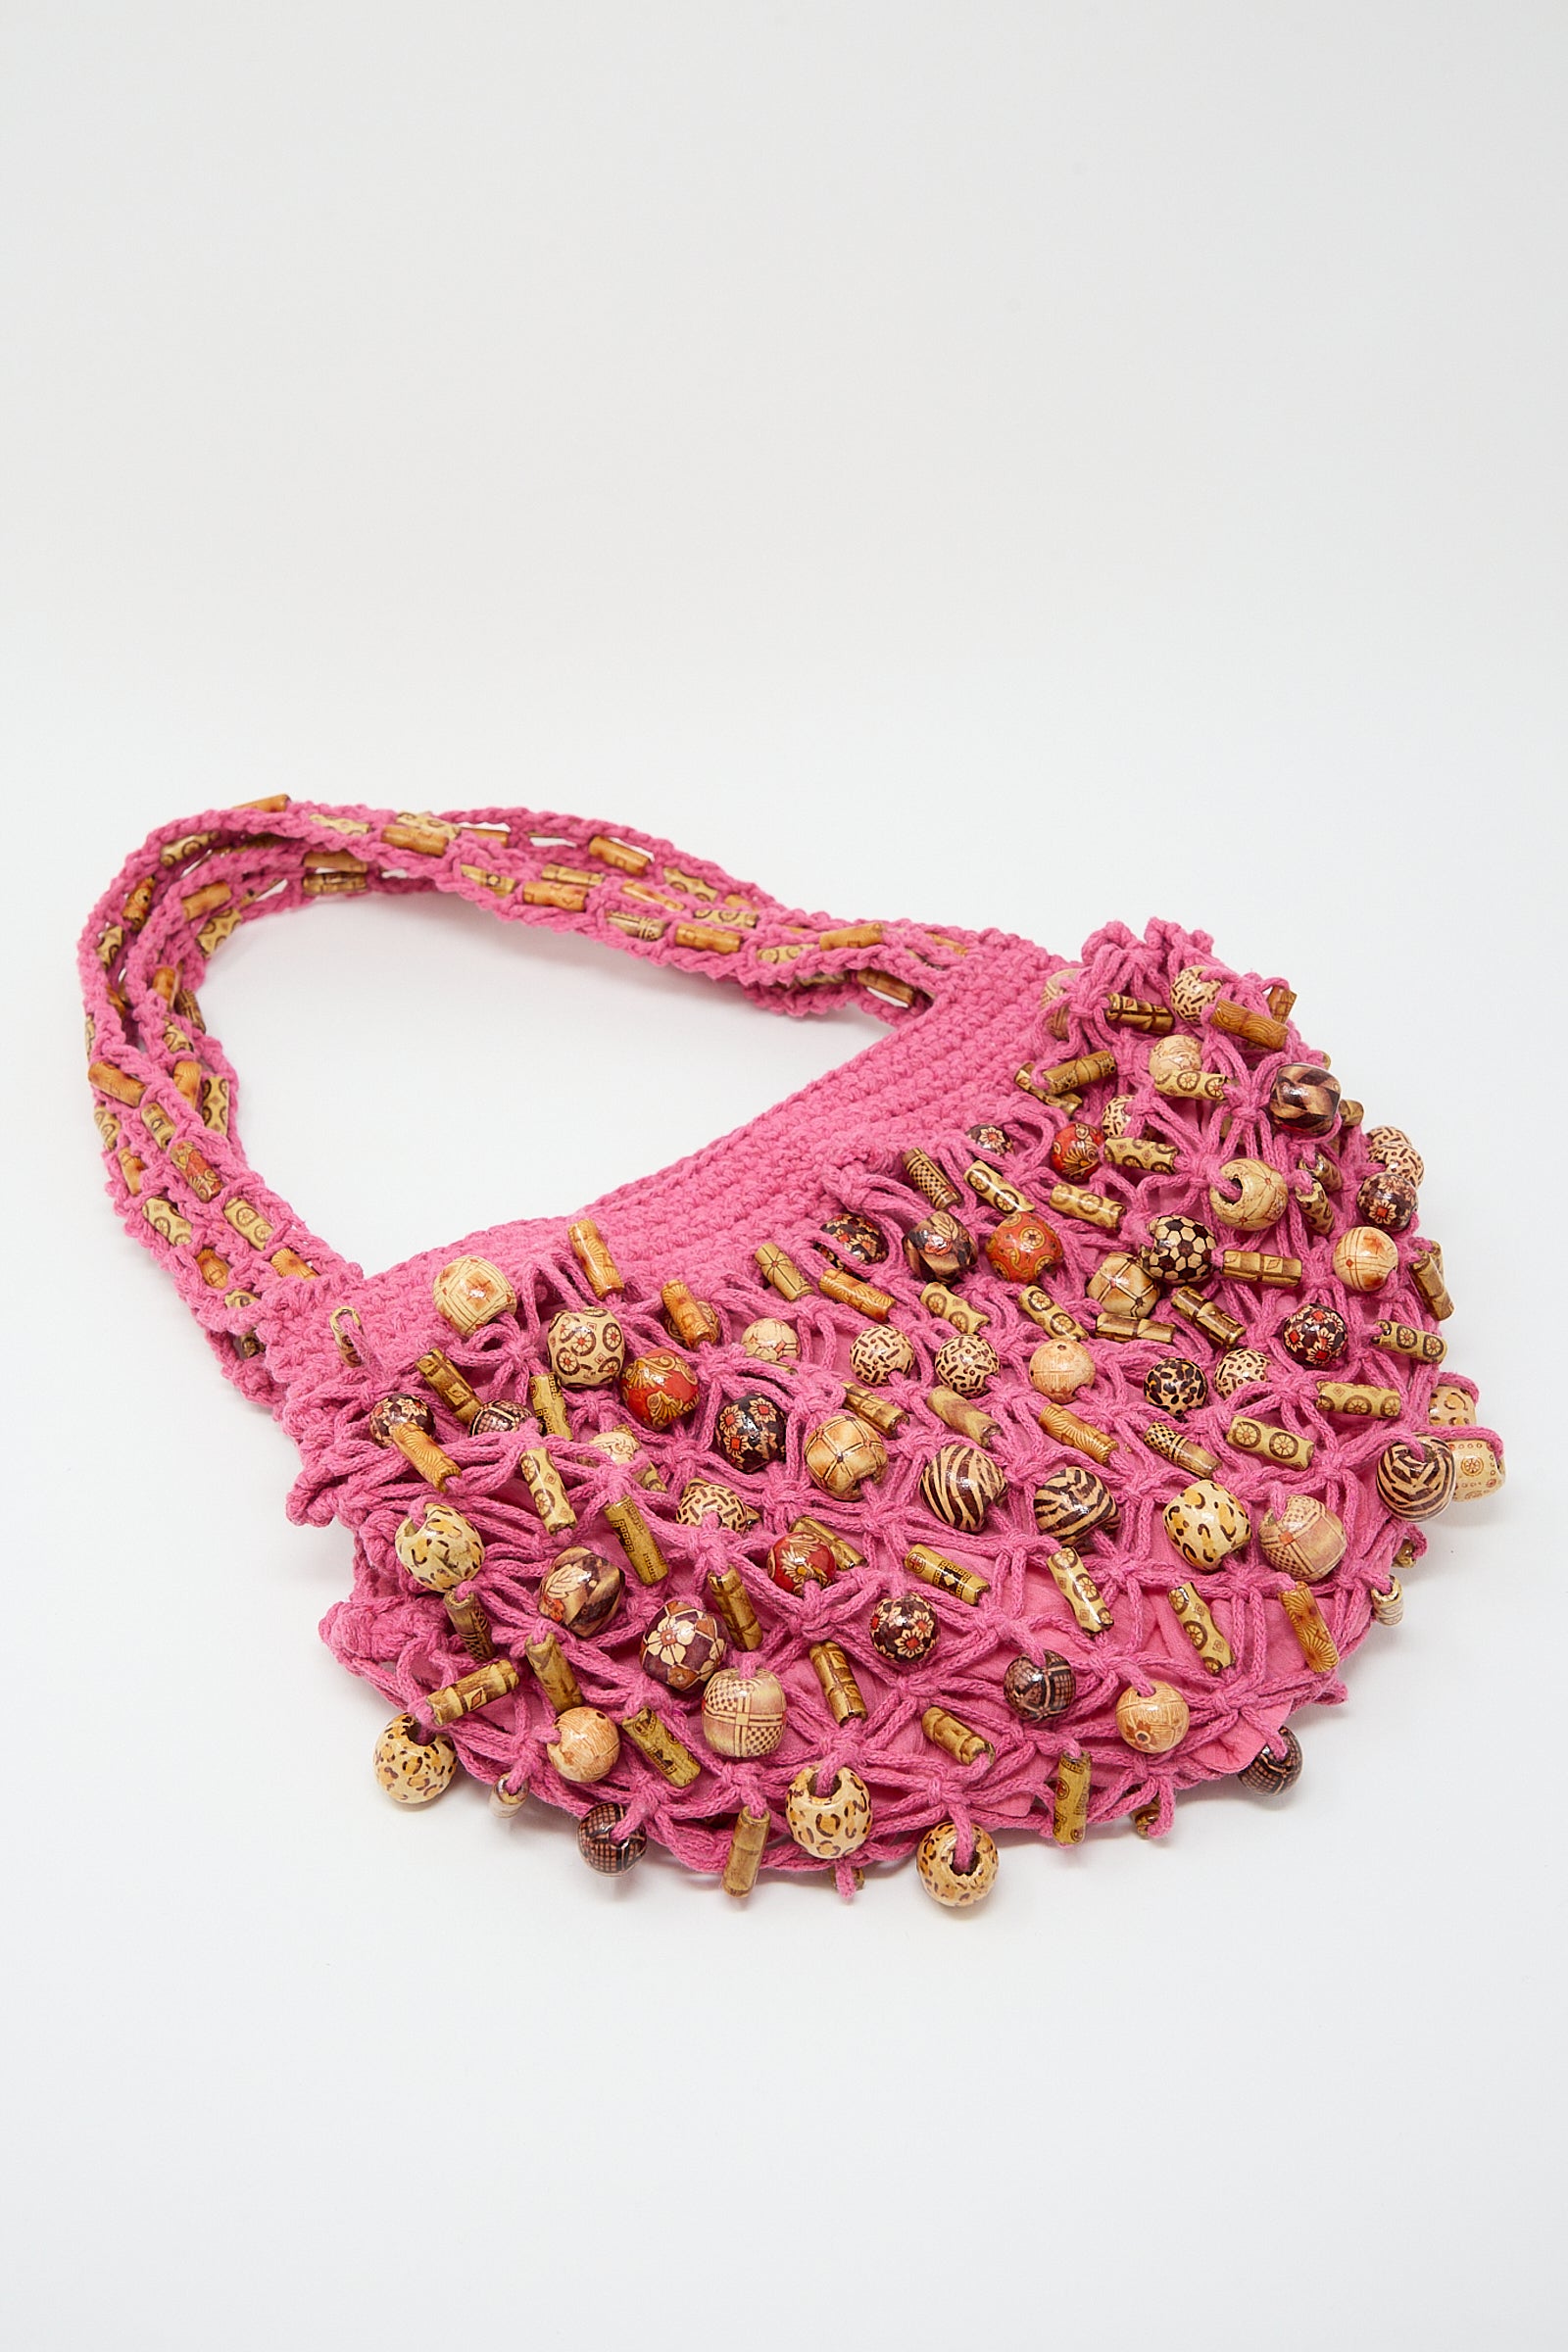 Pink knitted handbag adorned with small Luna Del Pinal assorted wooden beads on a white background.